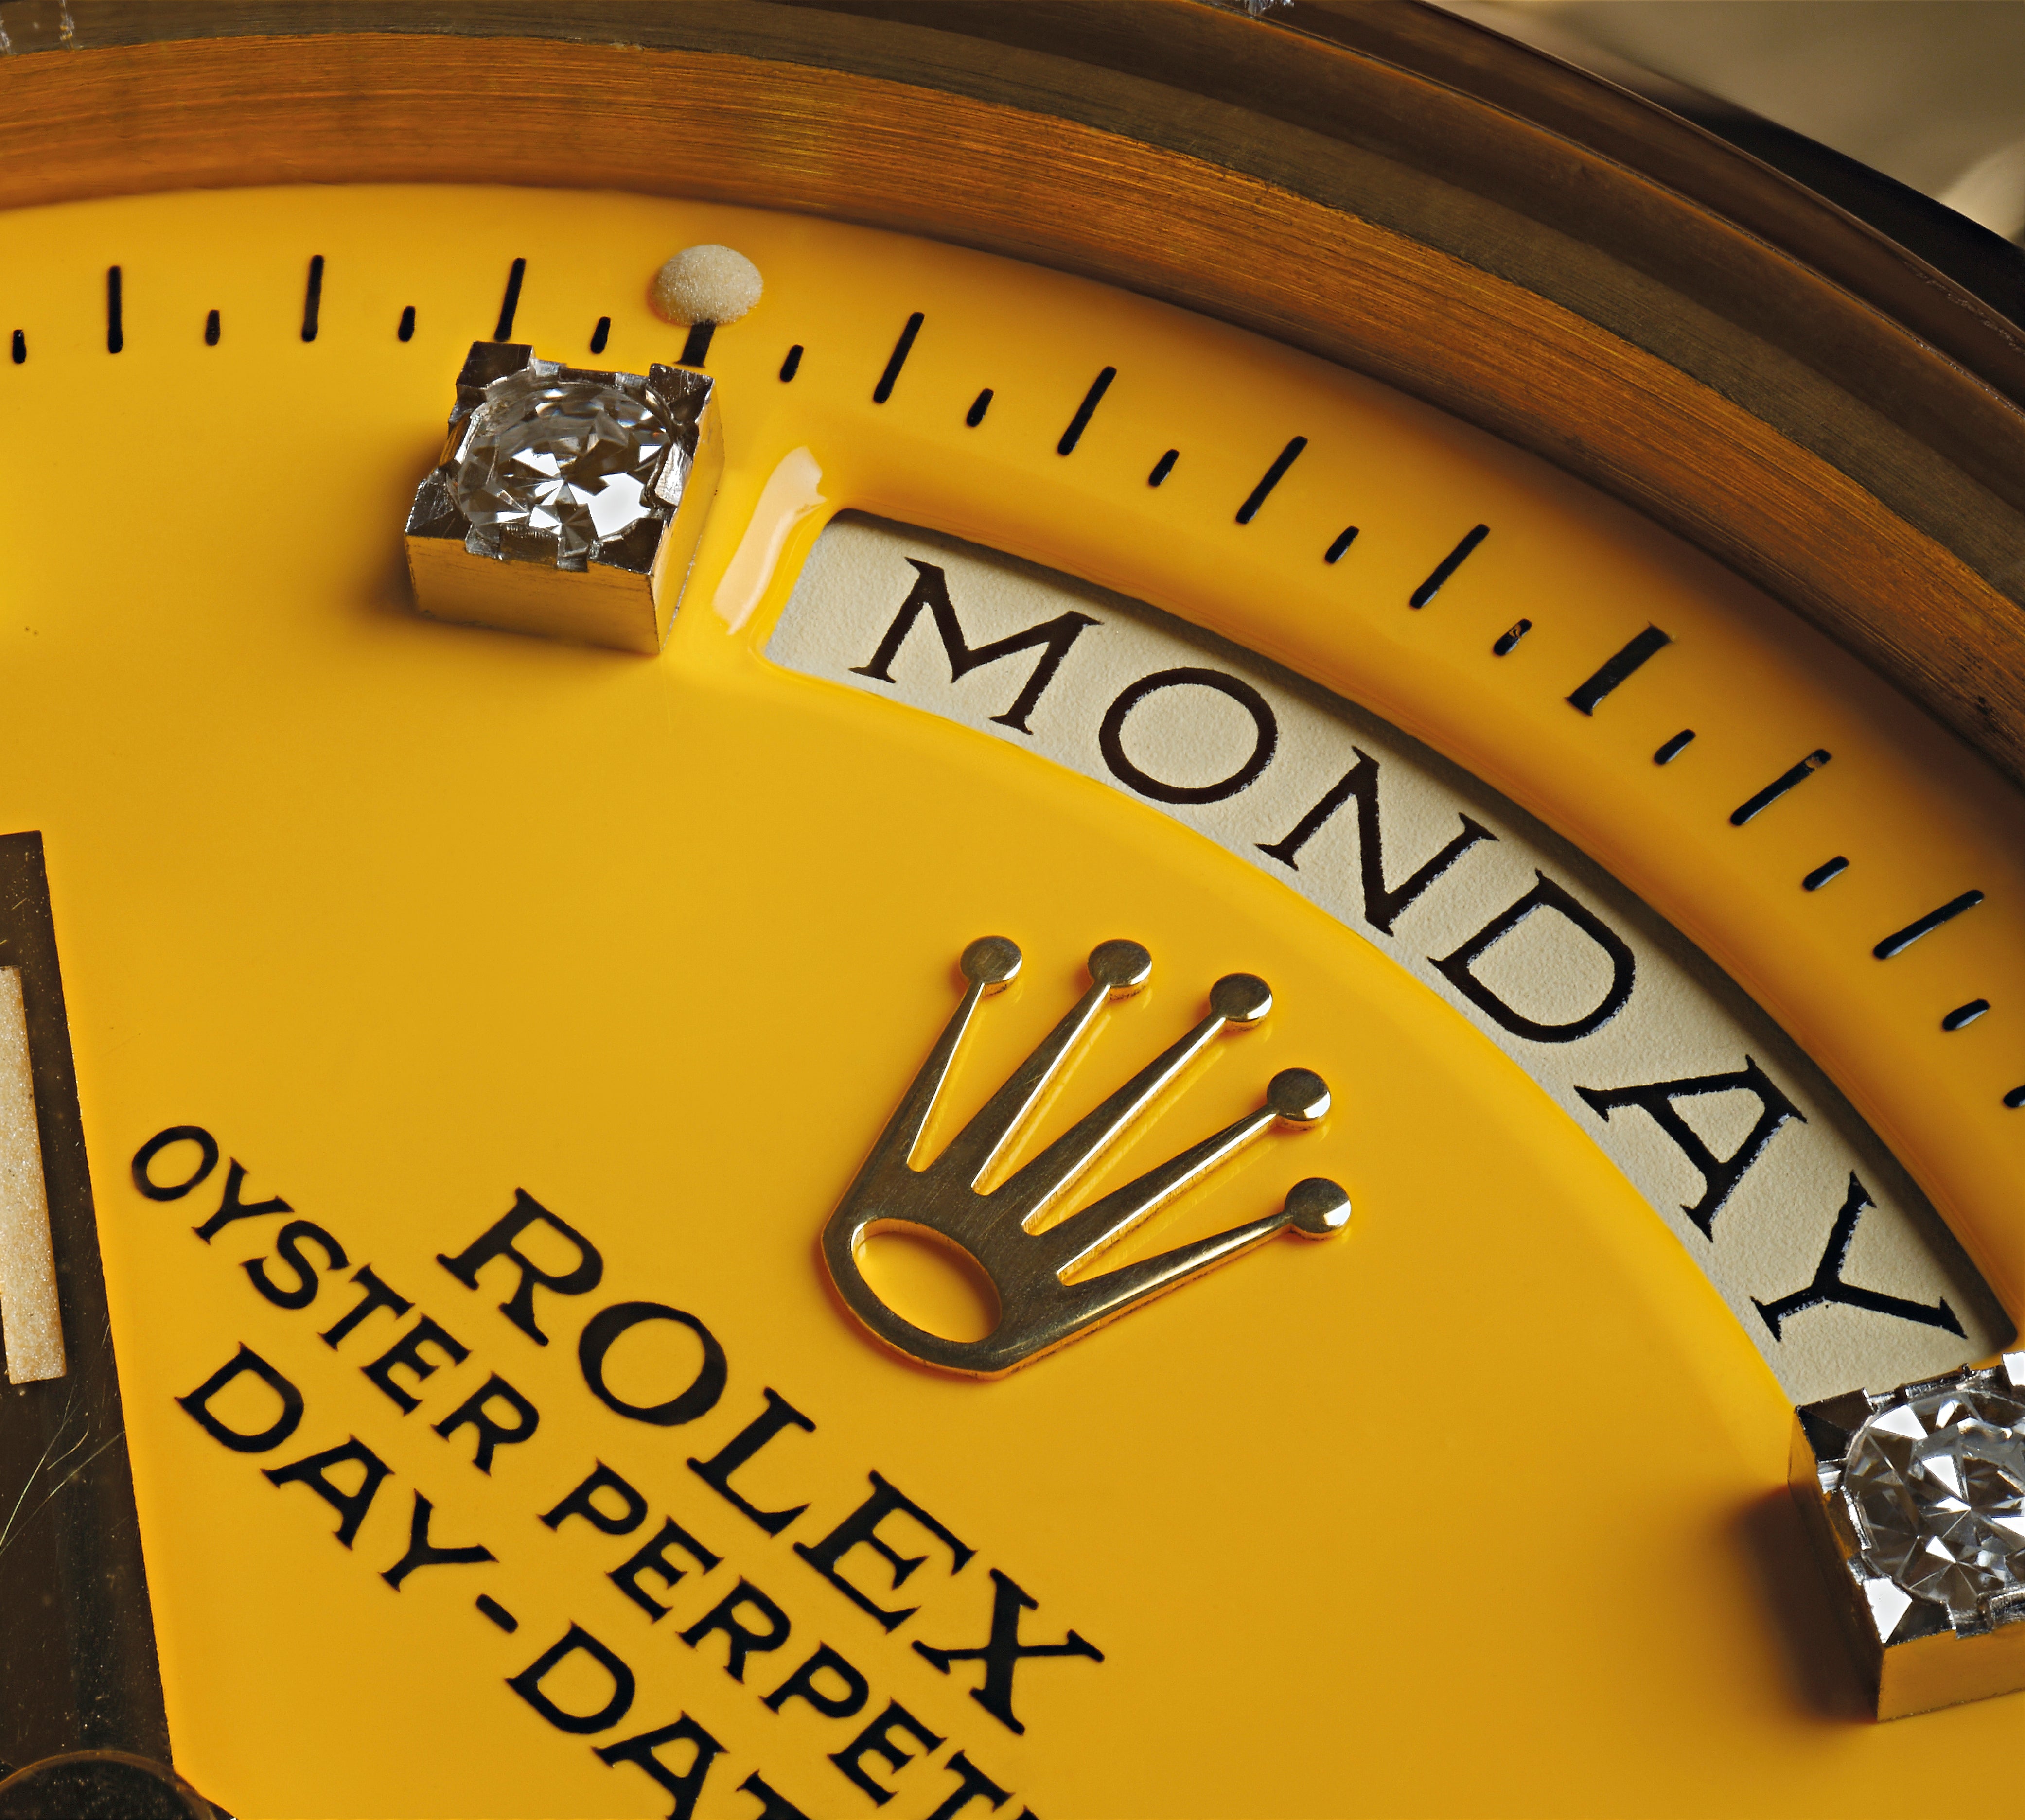 yellow dial rolex